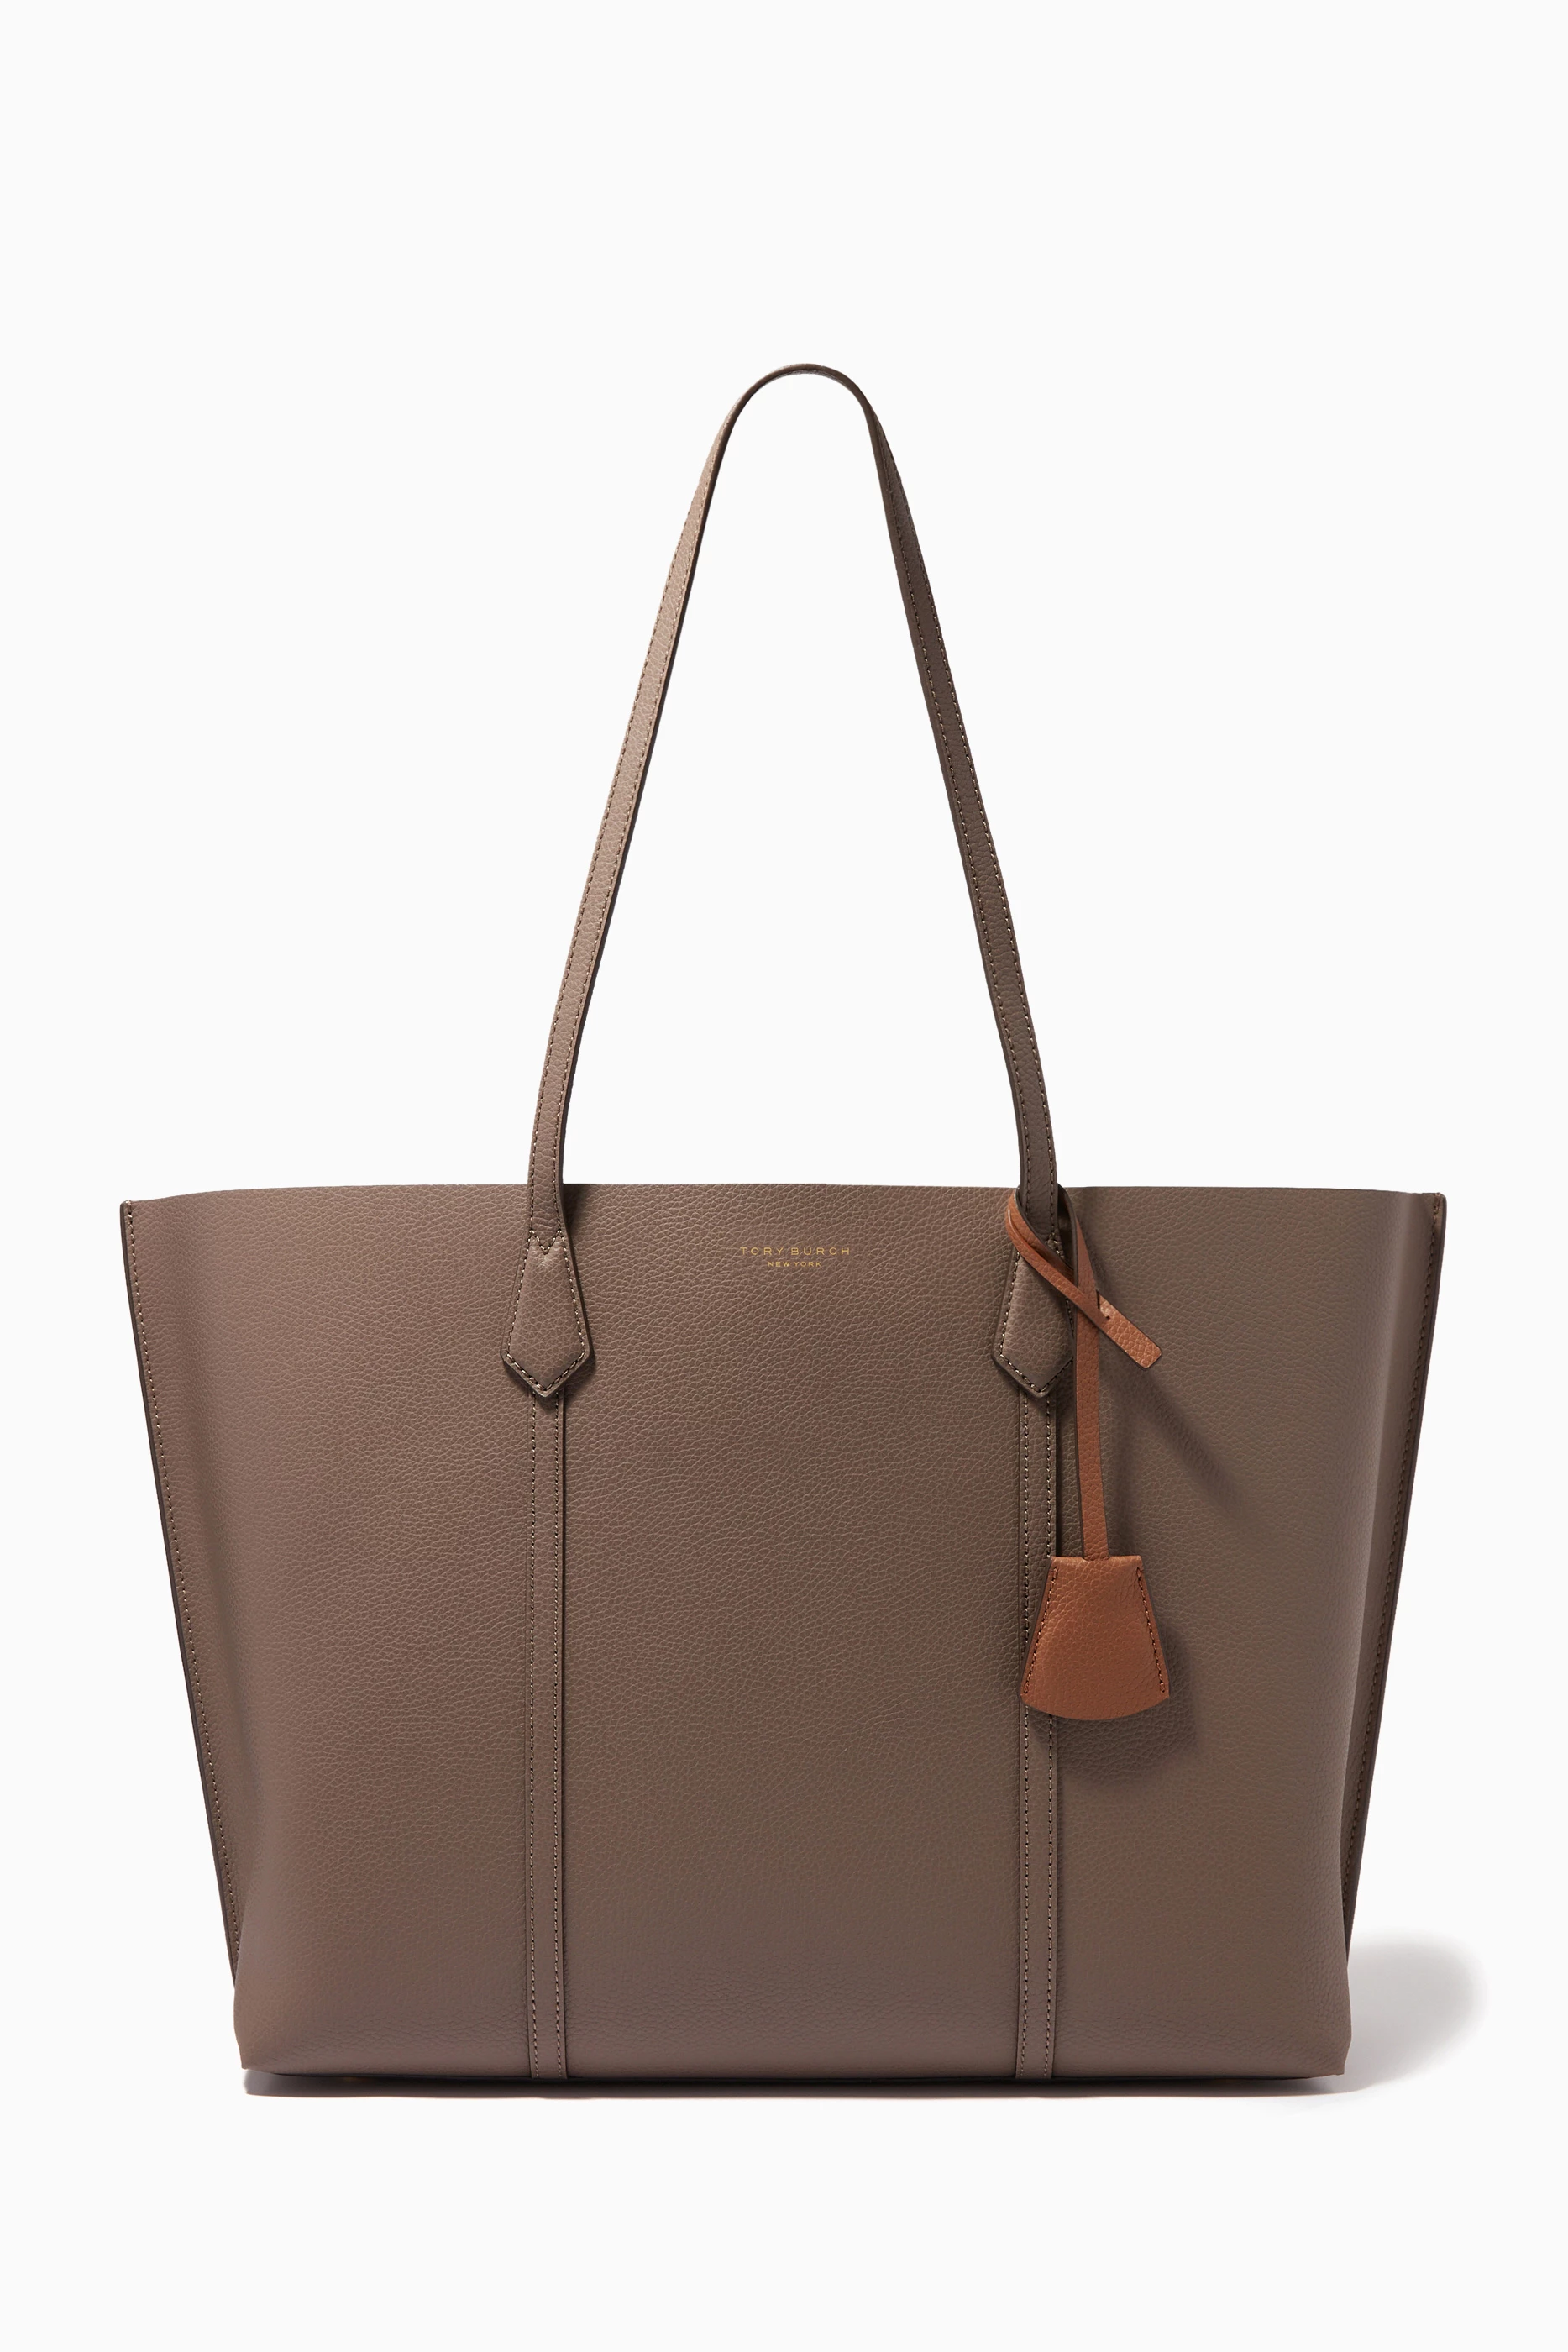 Shop Tory Burch Brown Perry Tote Bag in Pebbled Leather for WOMEN | Ounass  Saudi Arabia